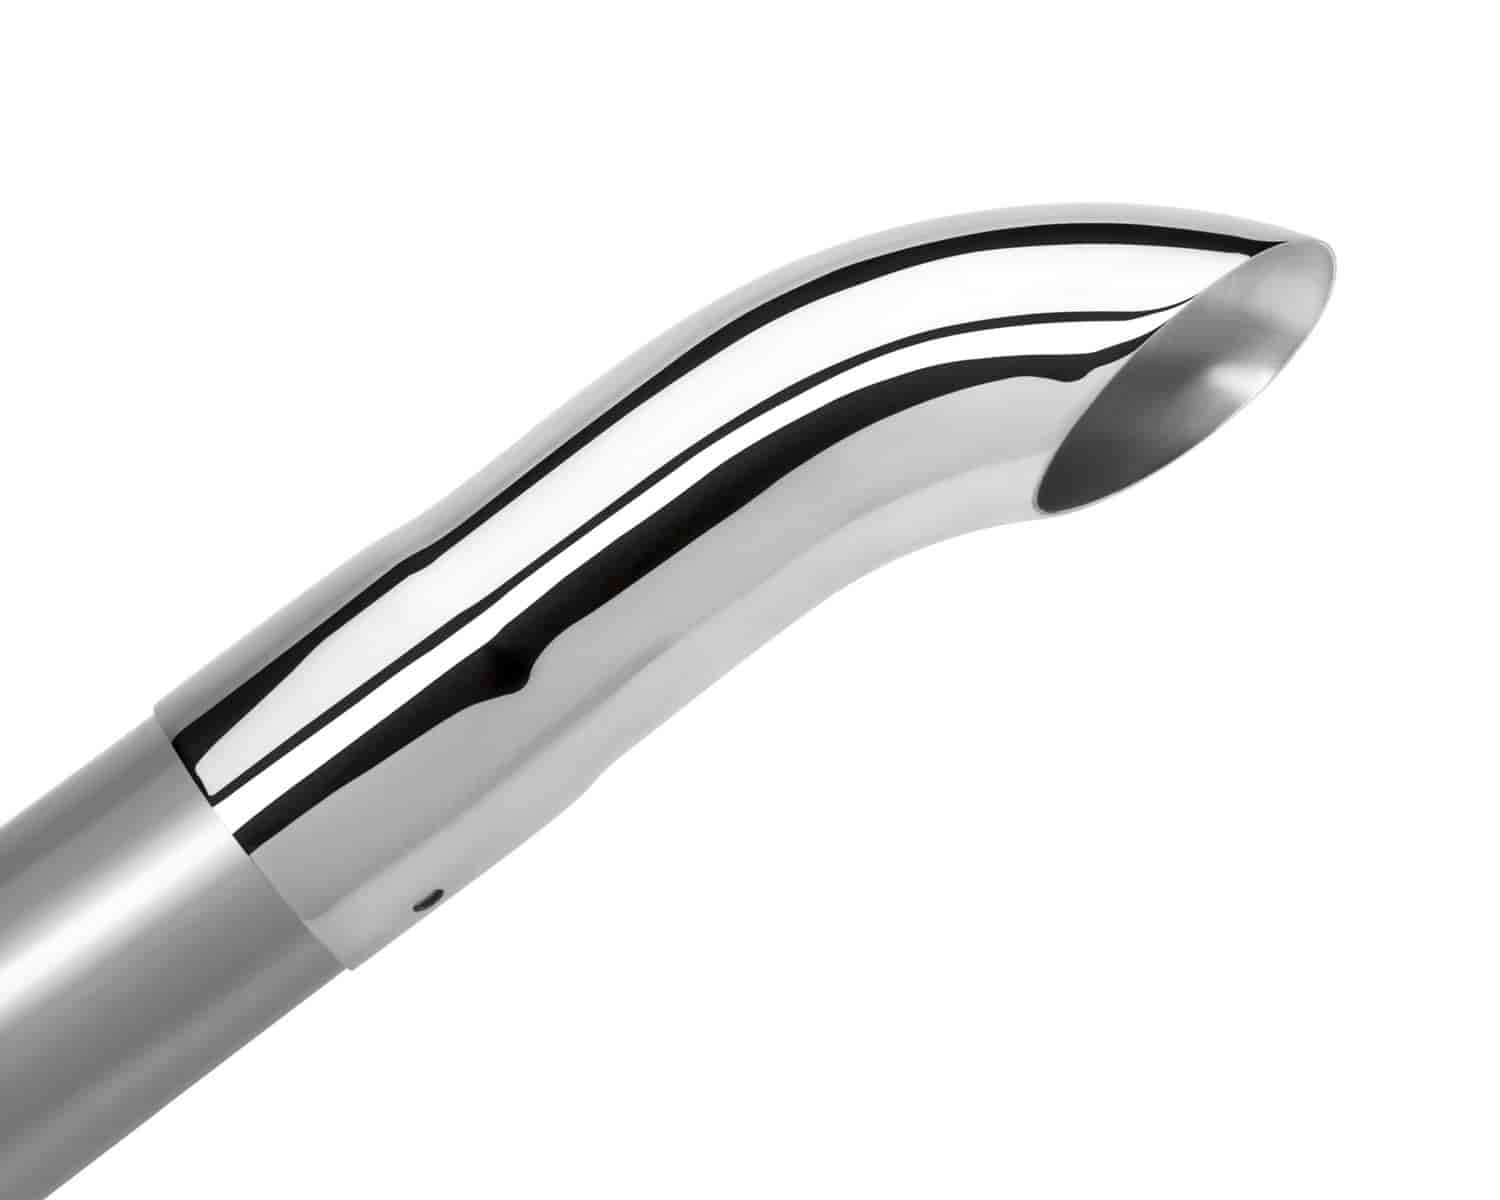 Stainless Steel Exhaust Tip Outlet Size: 2-1/2"